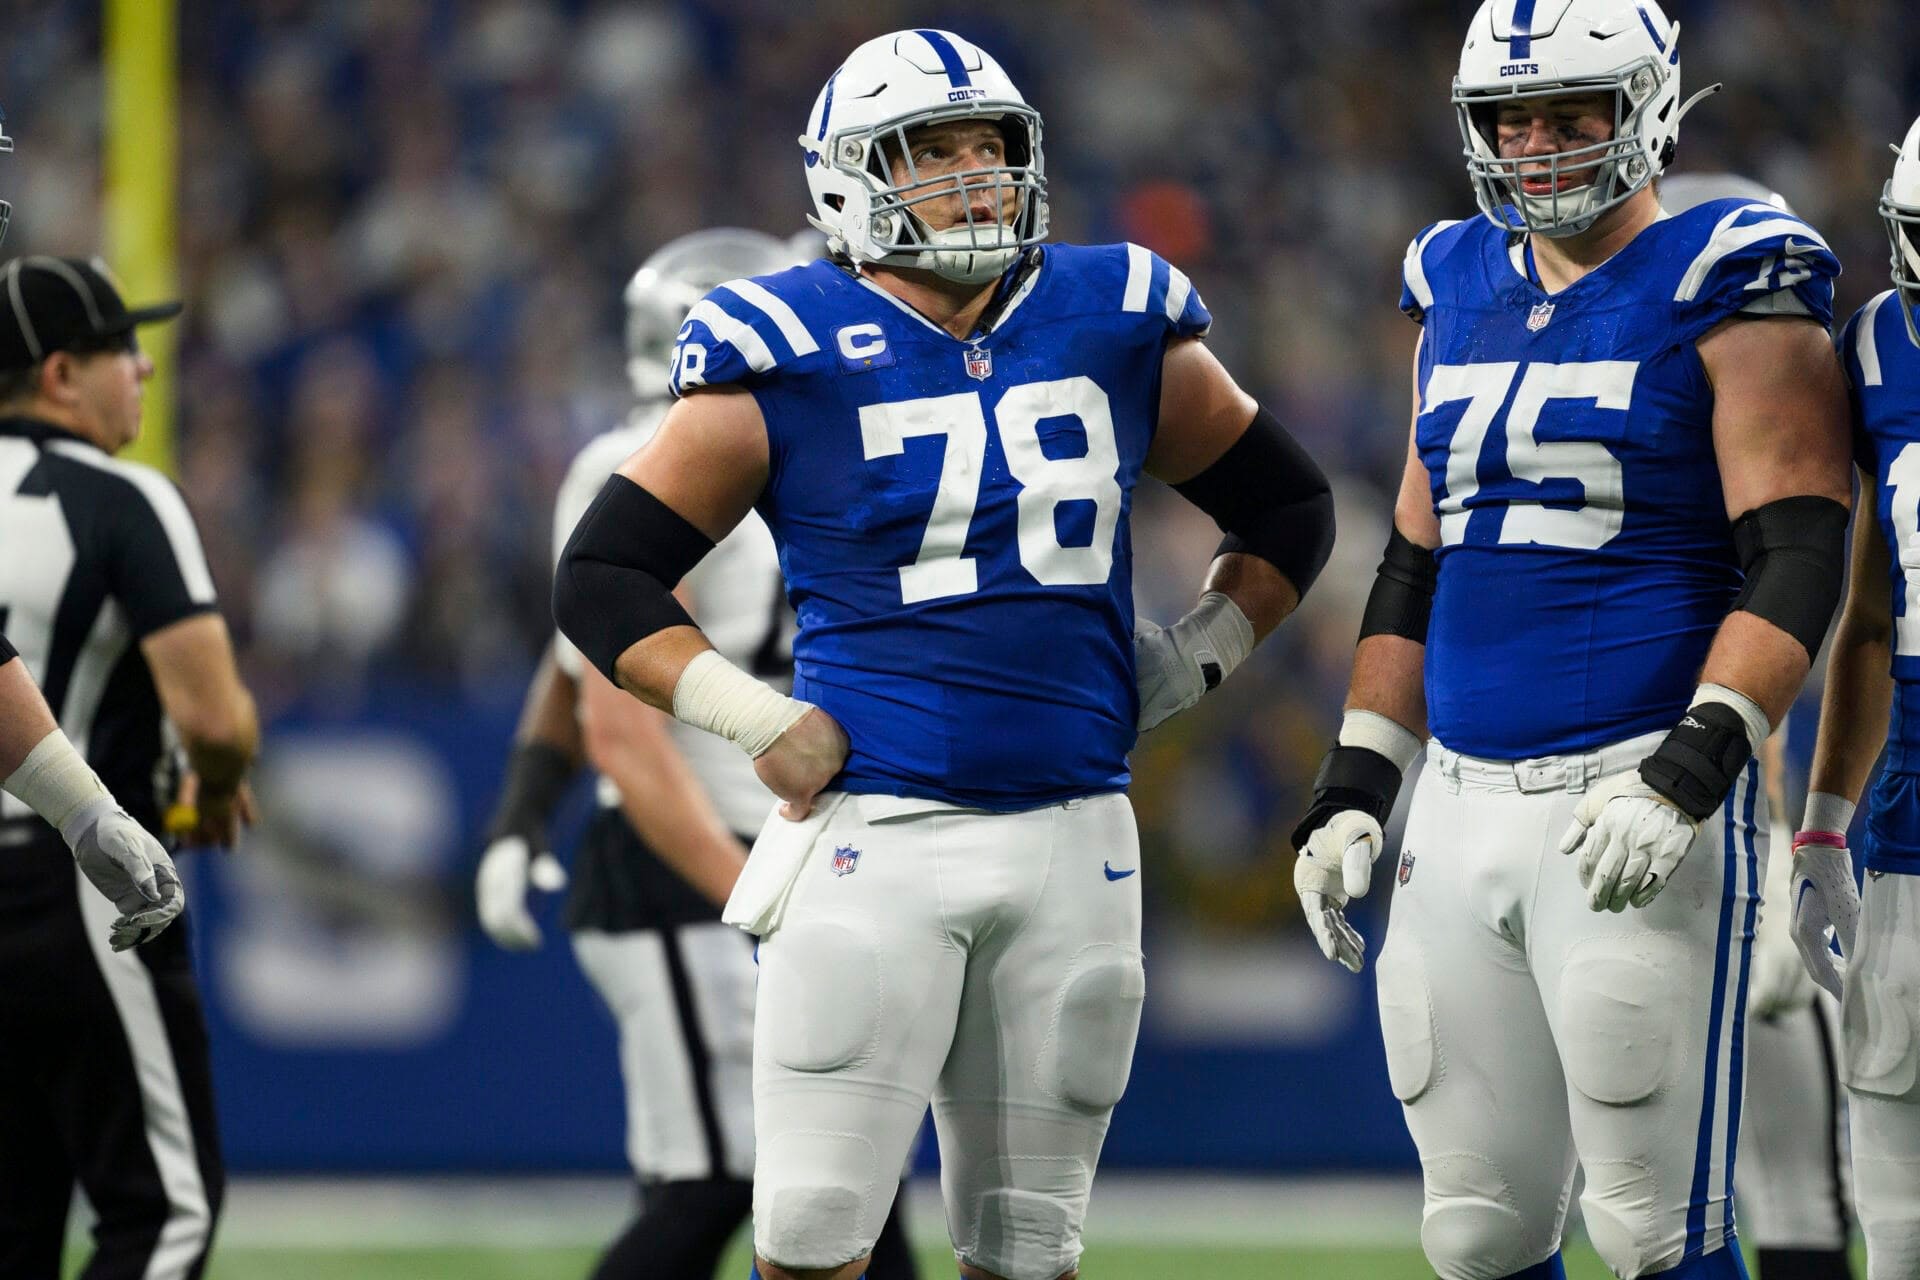 Ryan Kelly says Colts do not want to do an early contract extension